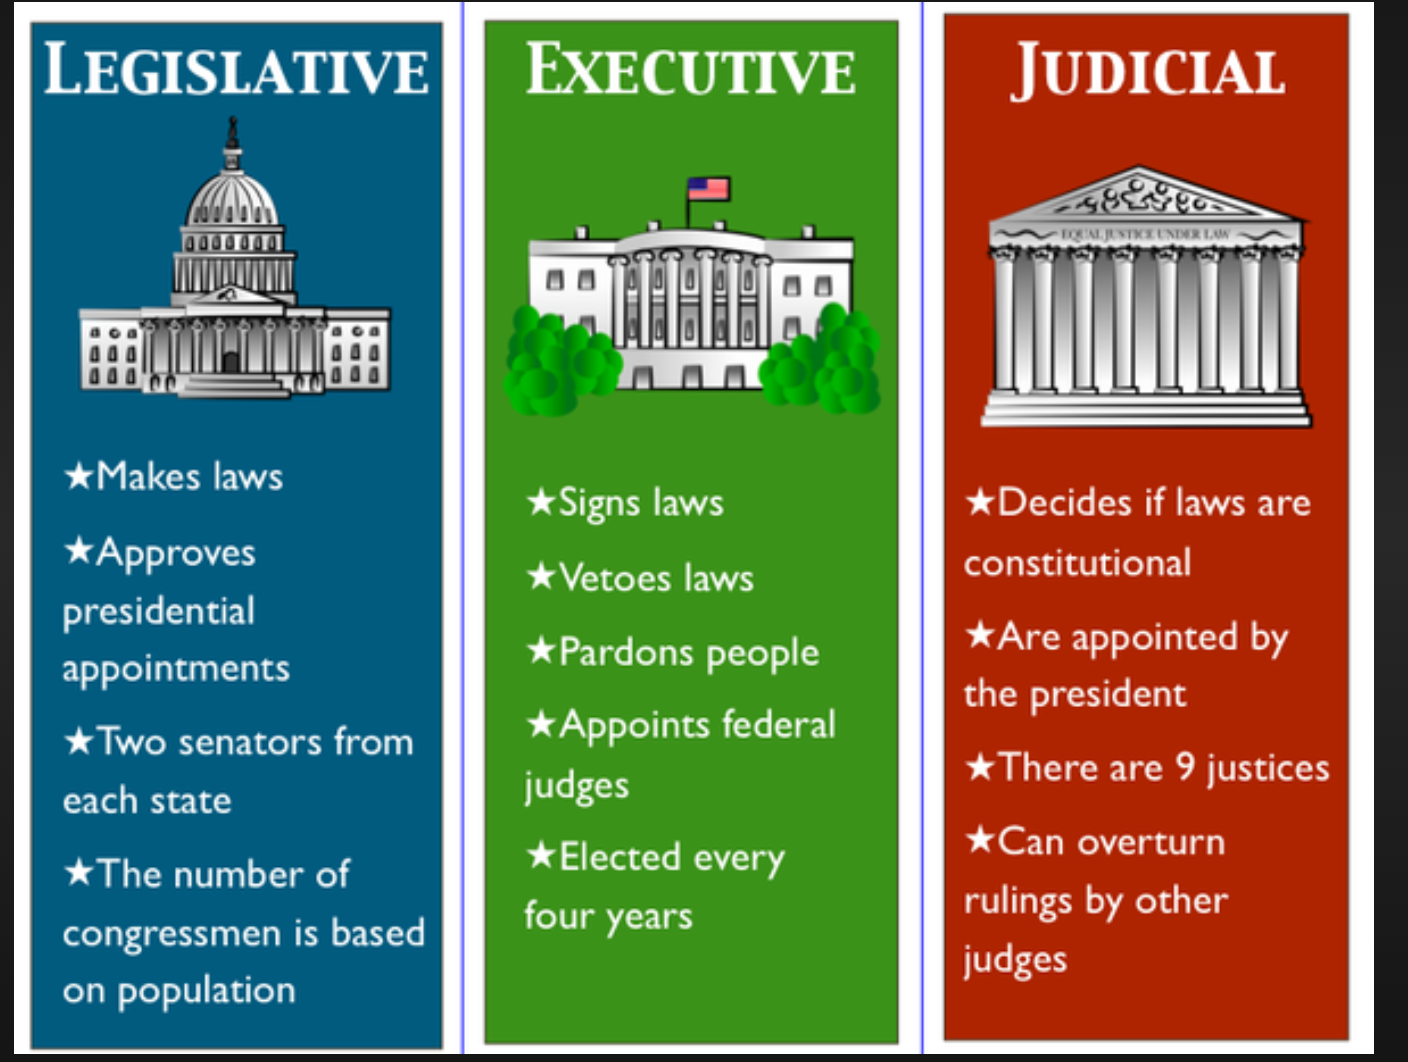 Three Branches of government. Разделение властей США на английском. Branches of Power in the USA. Legislative Executive and Judicial.